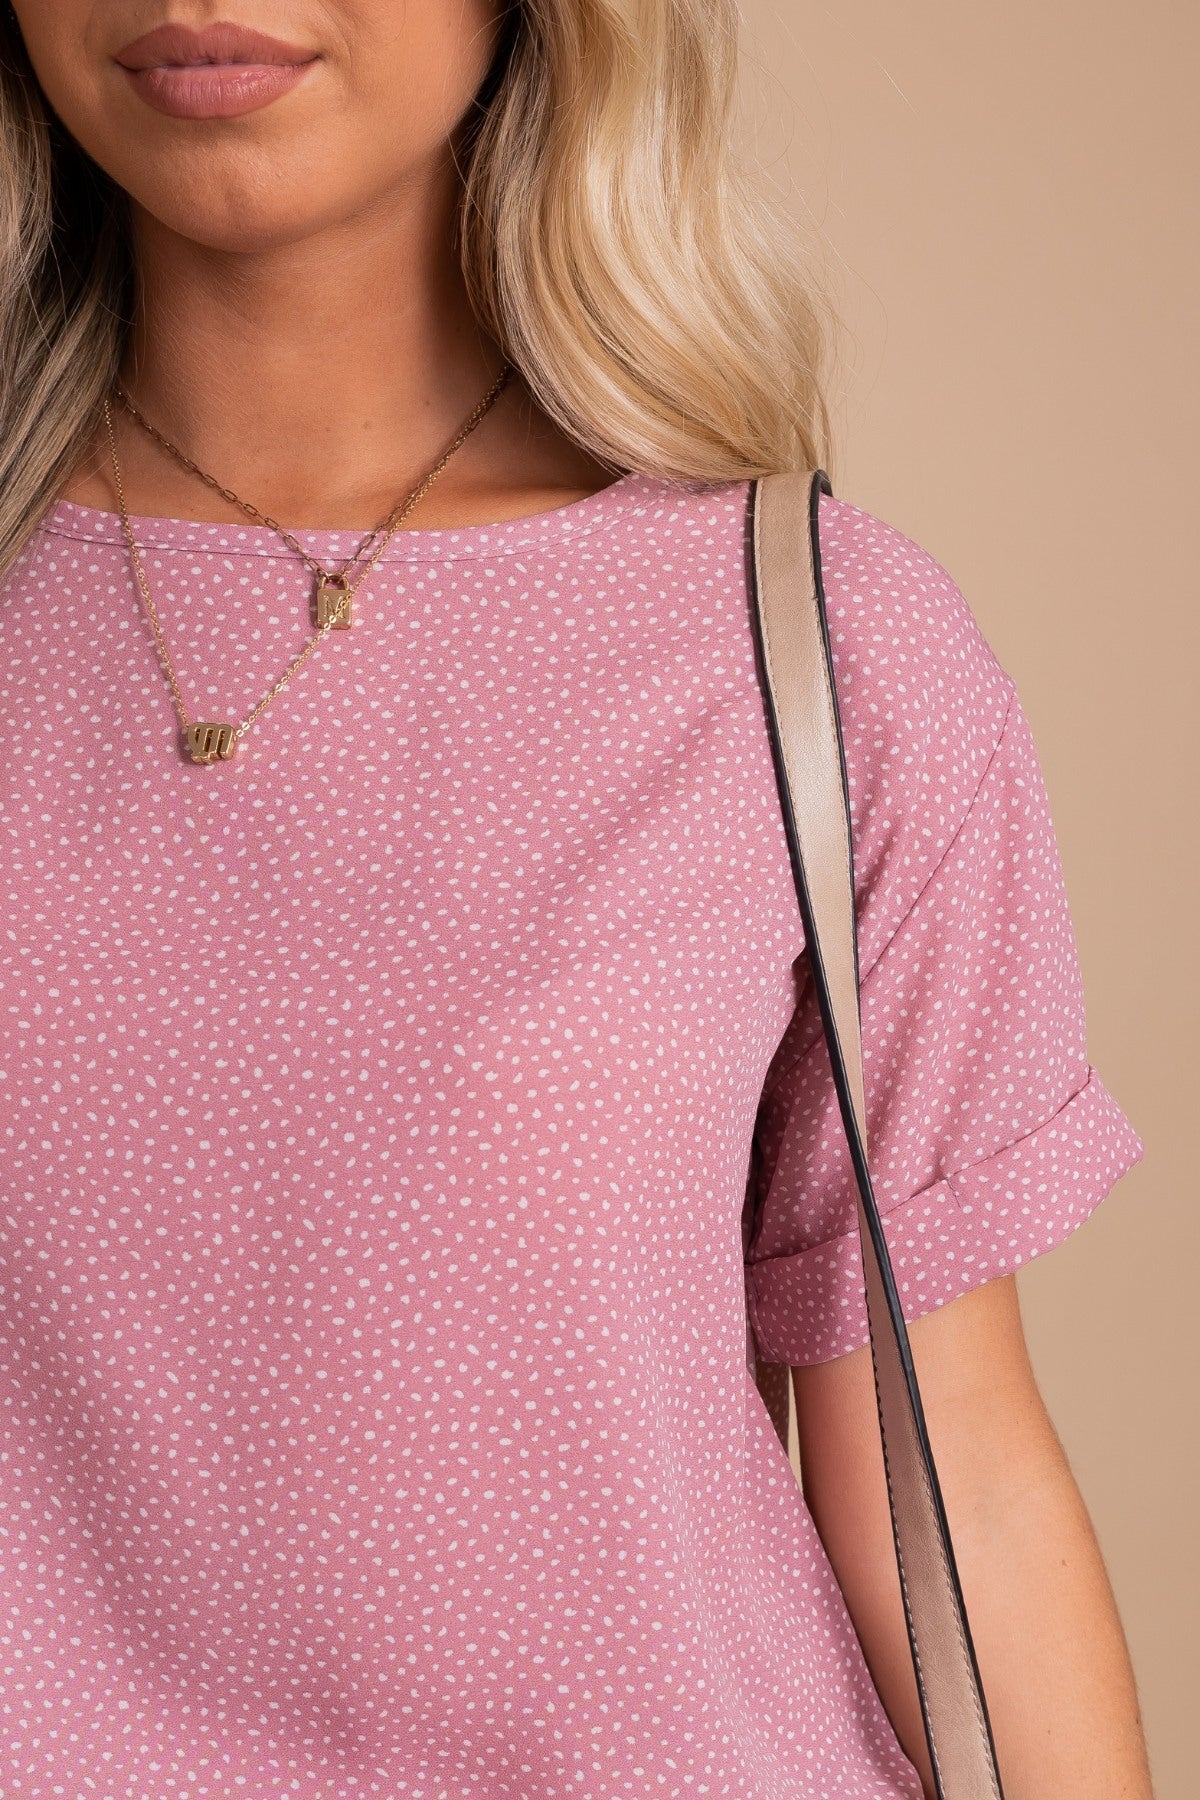 Short Sleeves Blouse with Round Neckline and Patterned Fabric in Pink